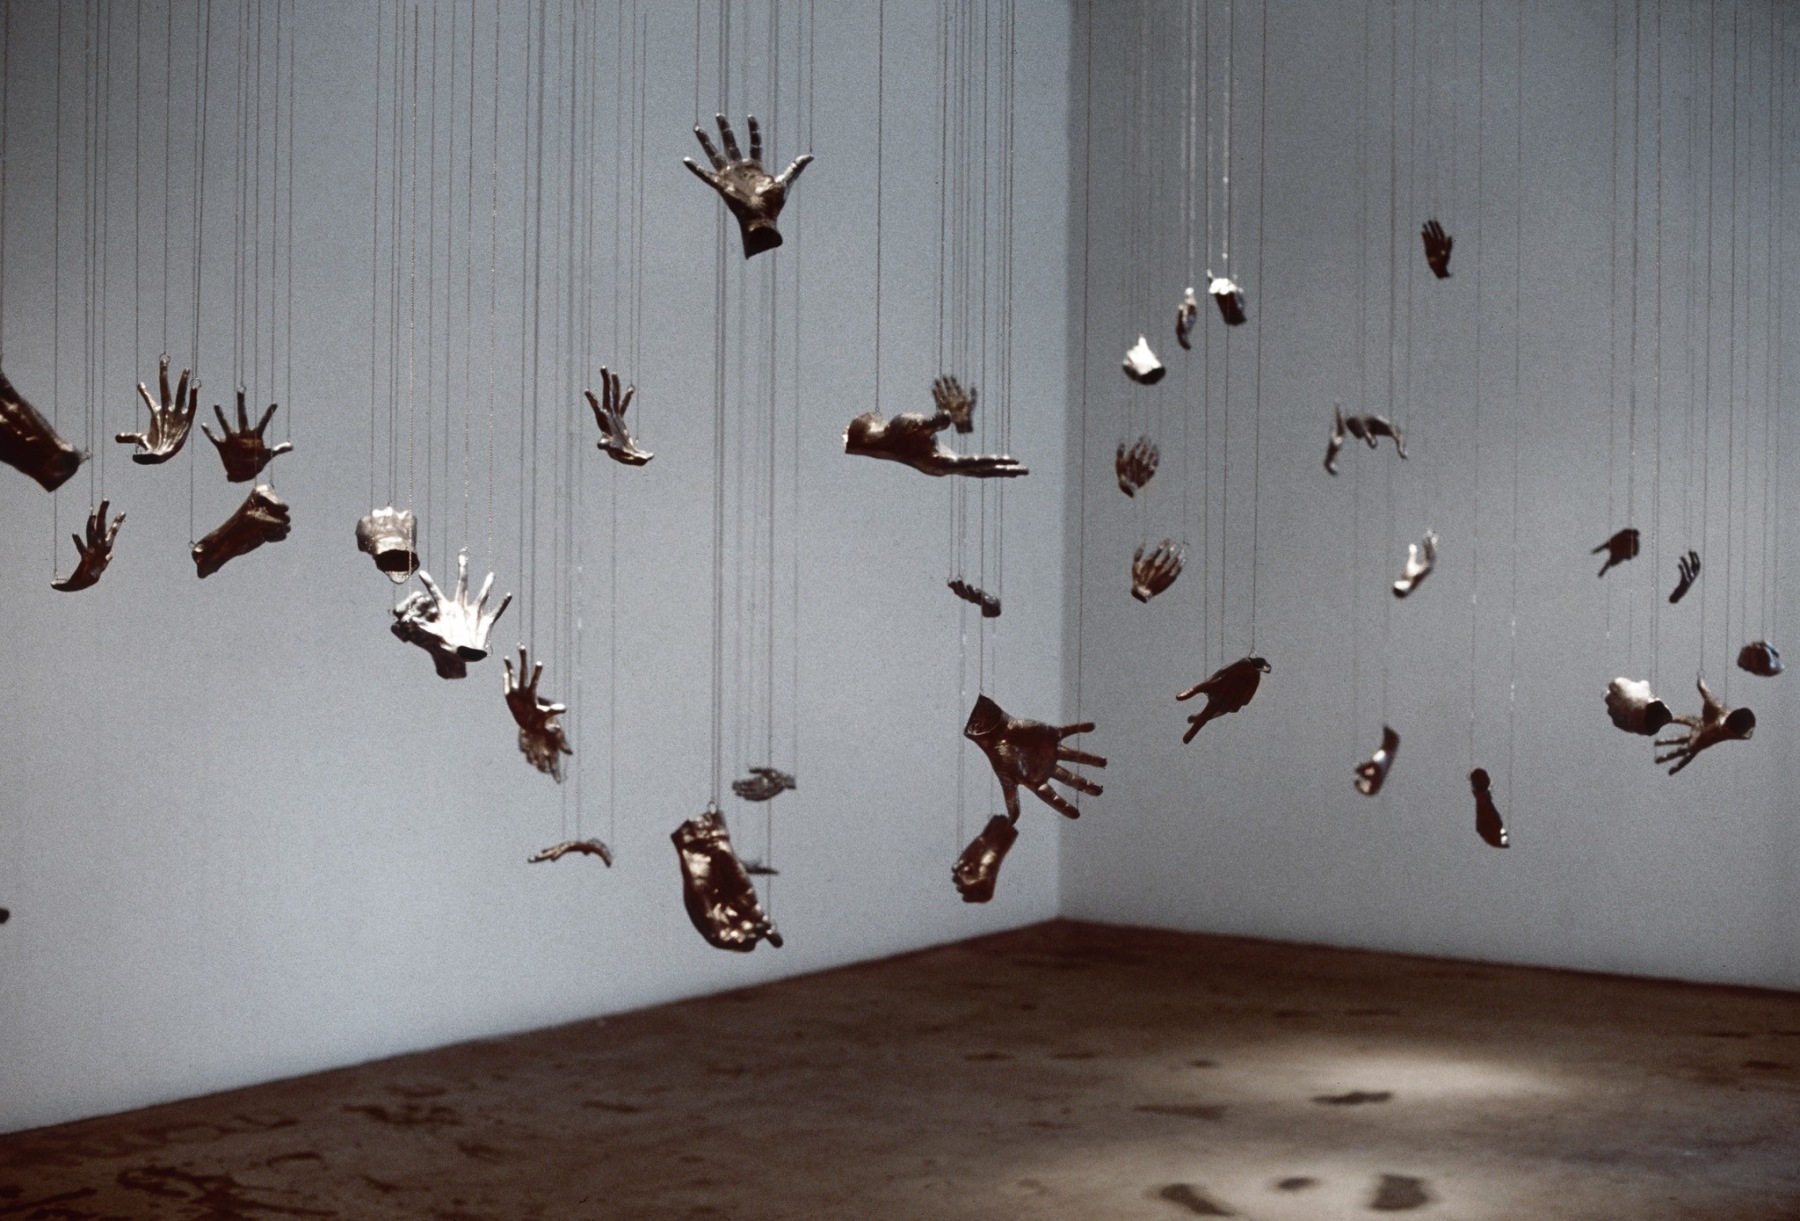 Liz Larner, Installation view: without words, 303 Gallery, New York, 1994